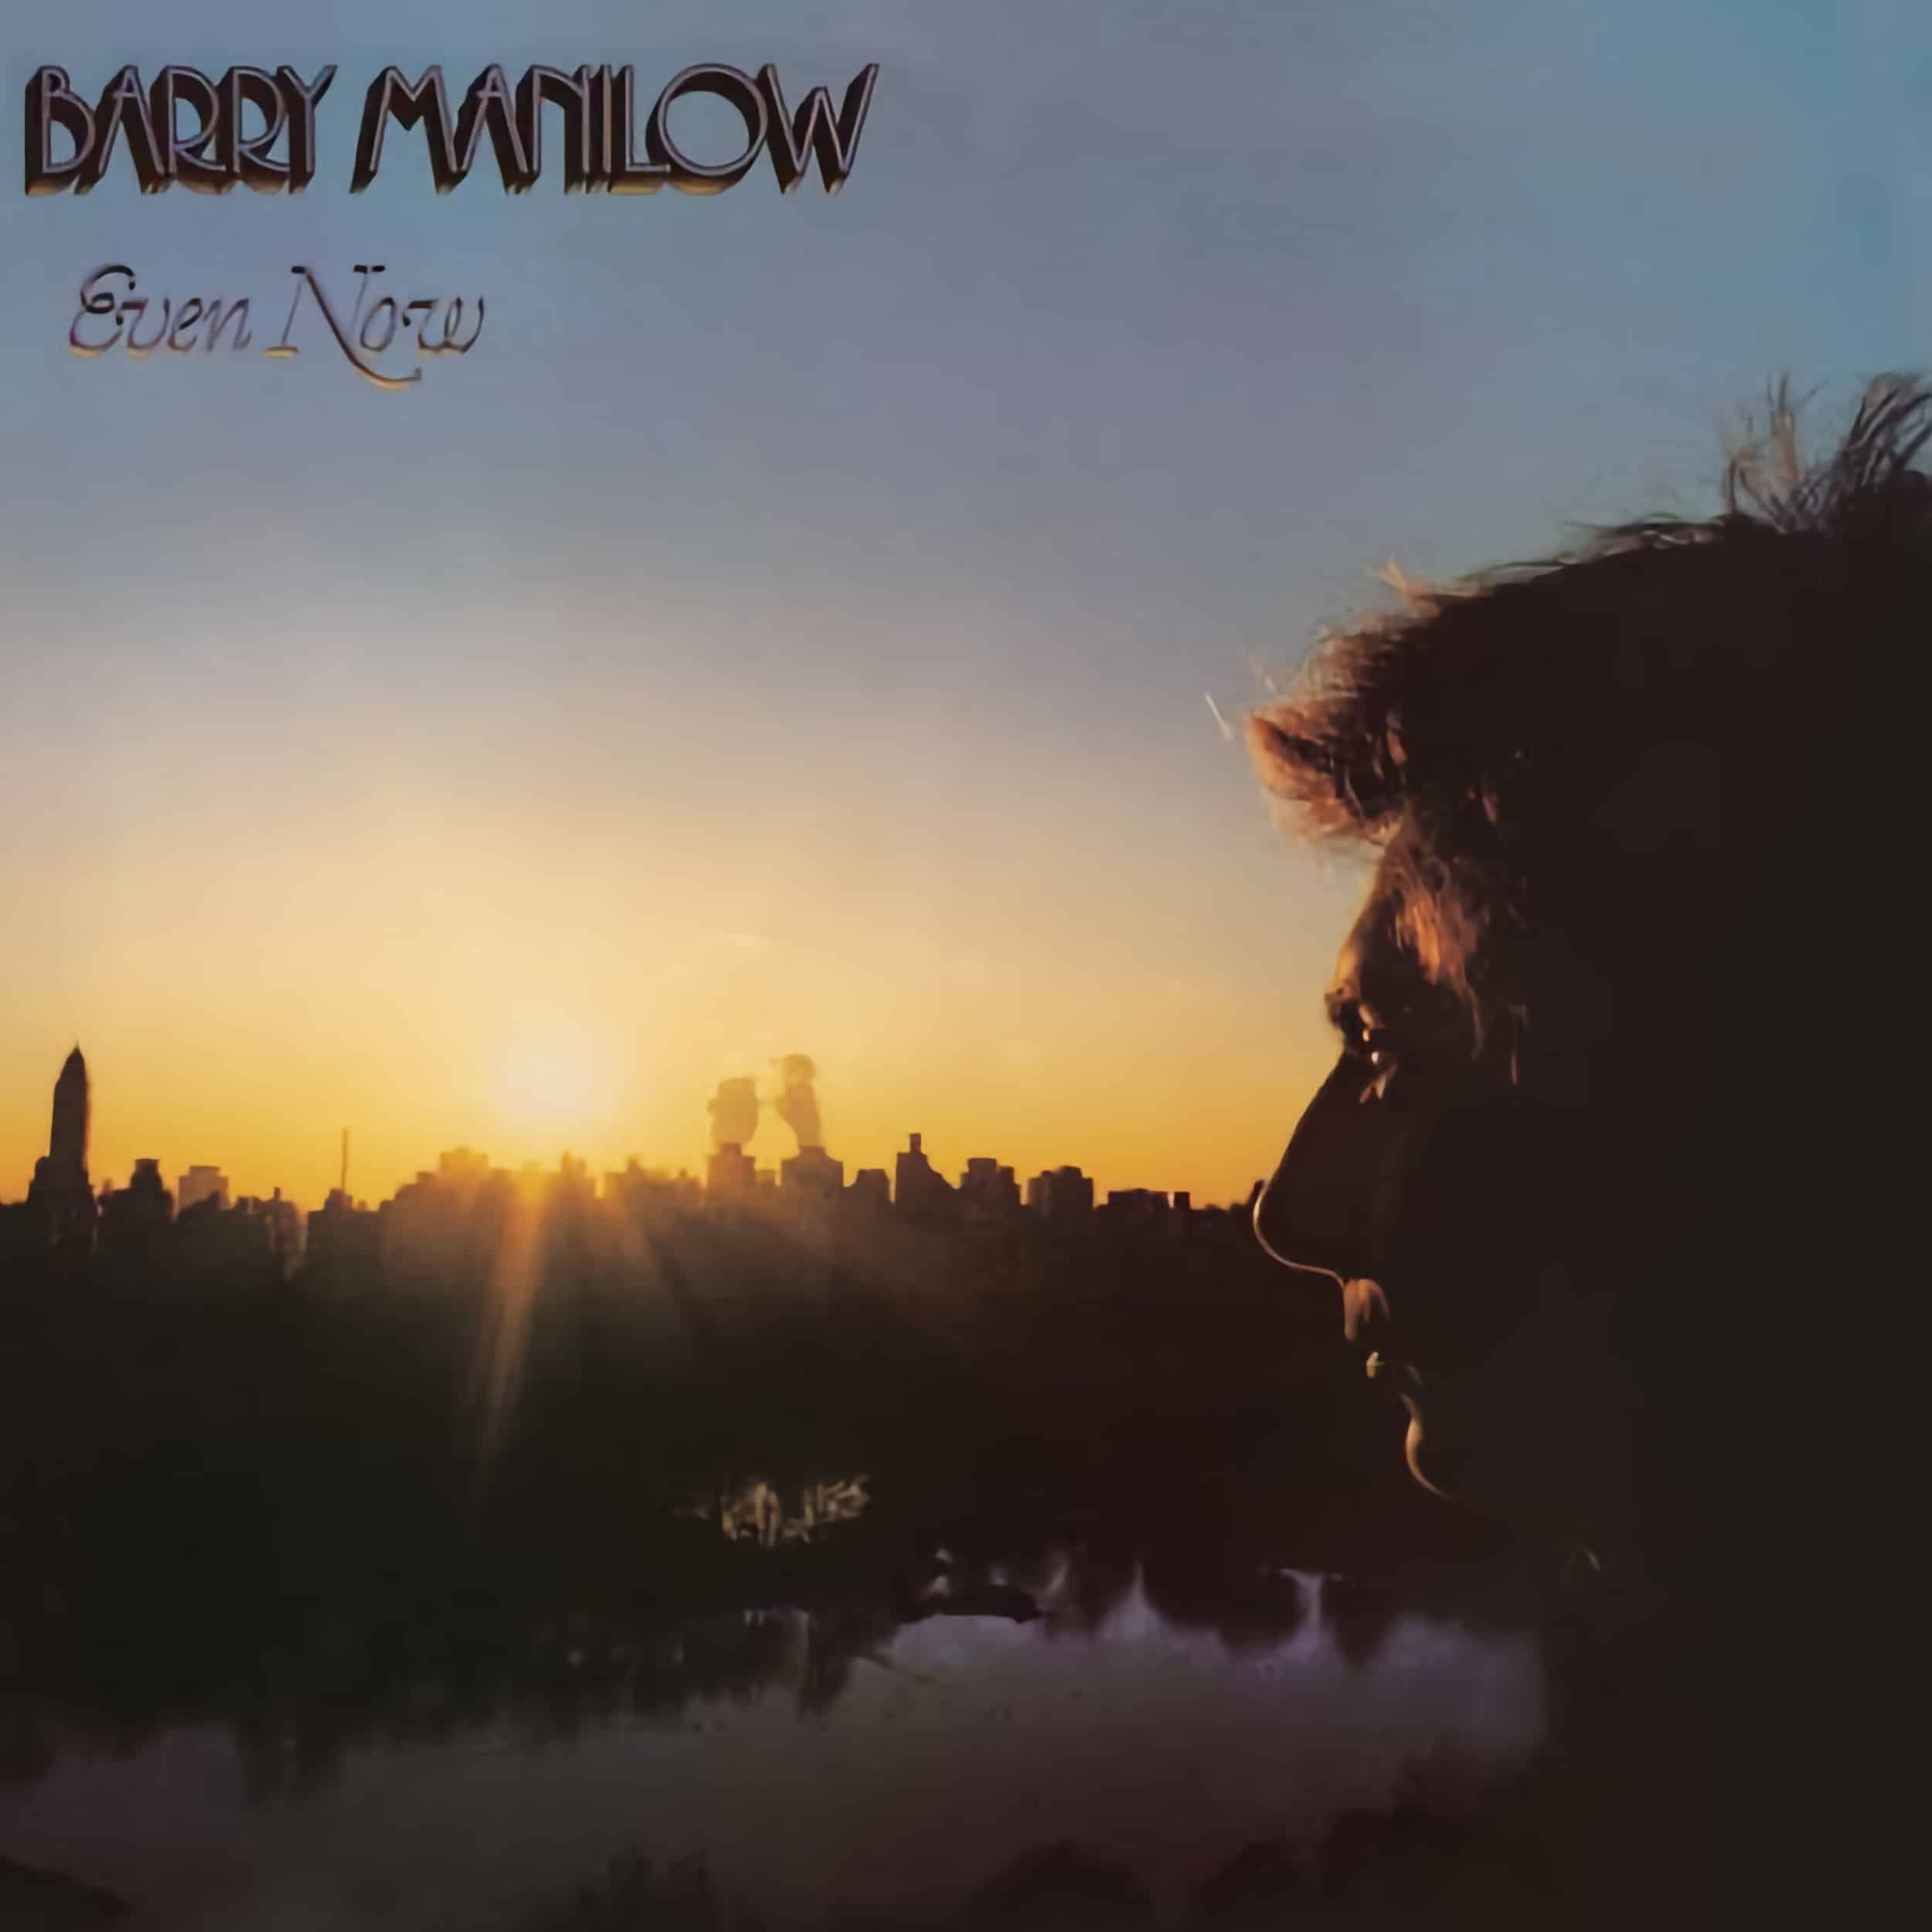 Barry Manilow – Even Now